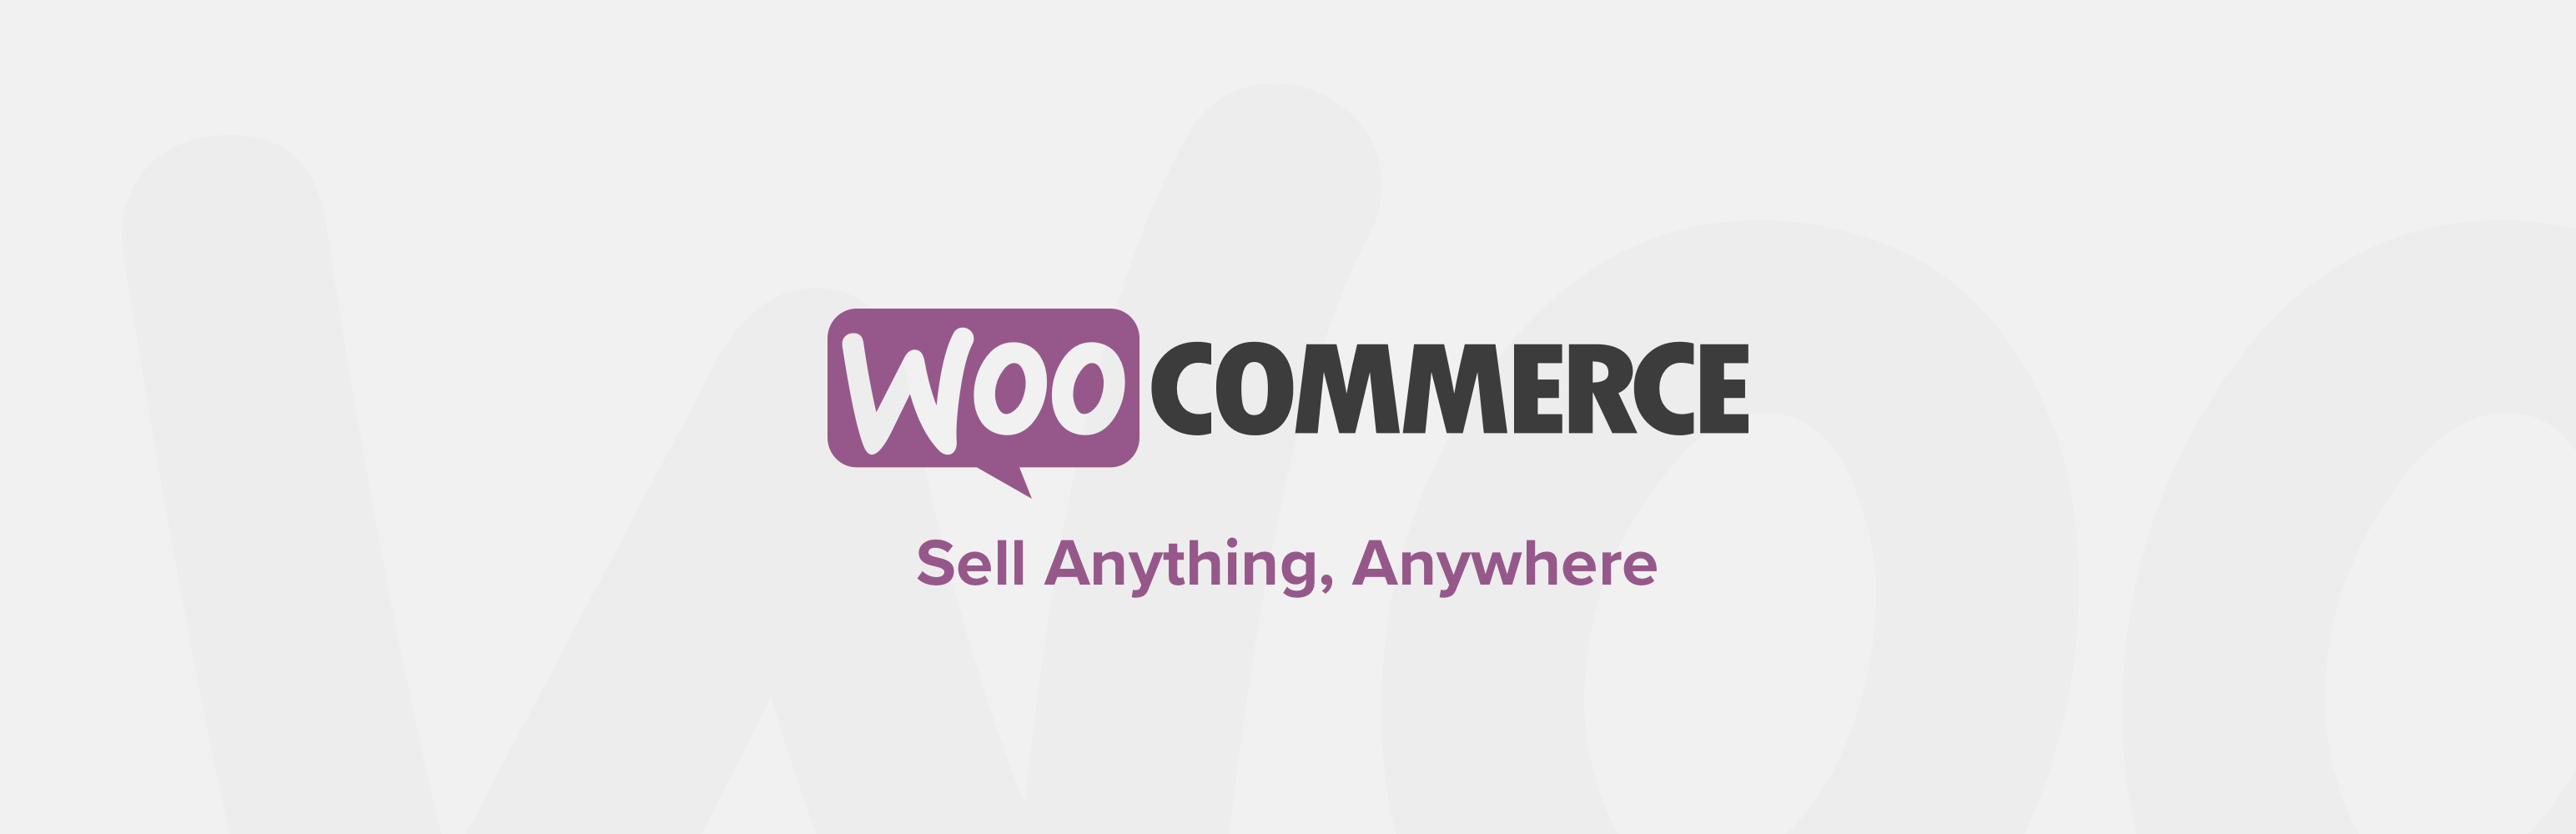 Advantages and Disadvantages of WooCommerce